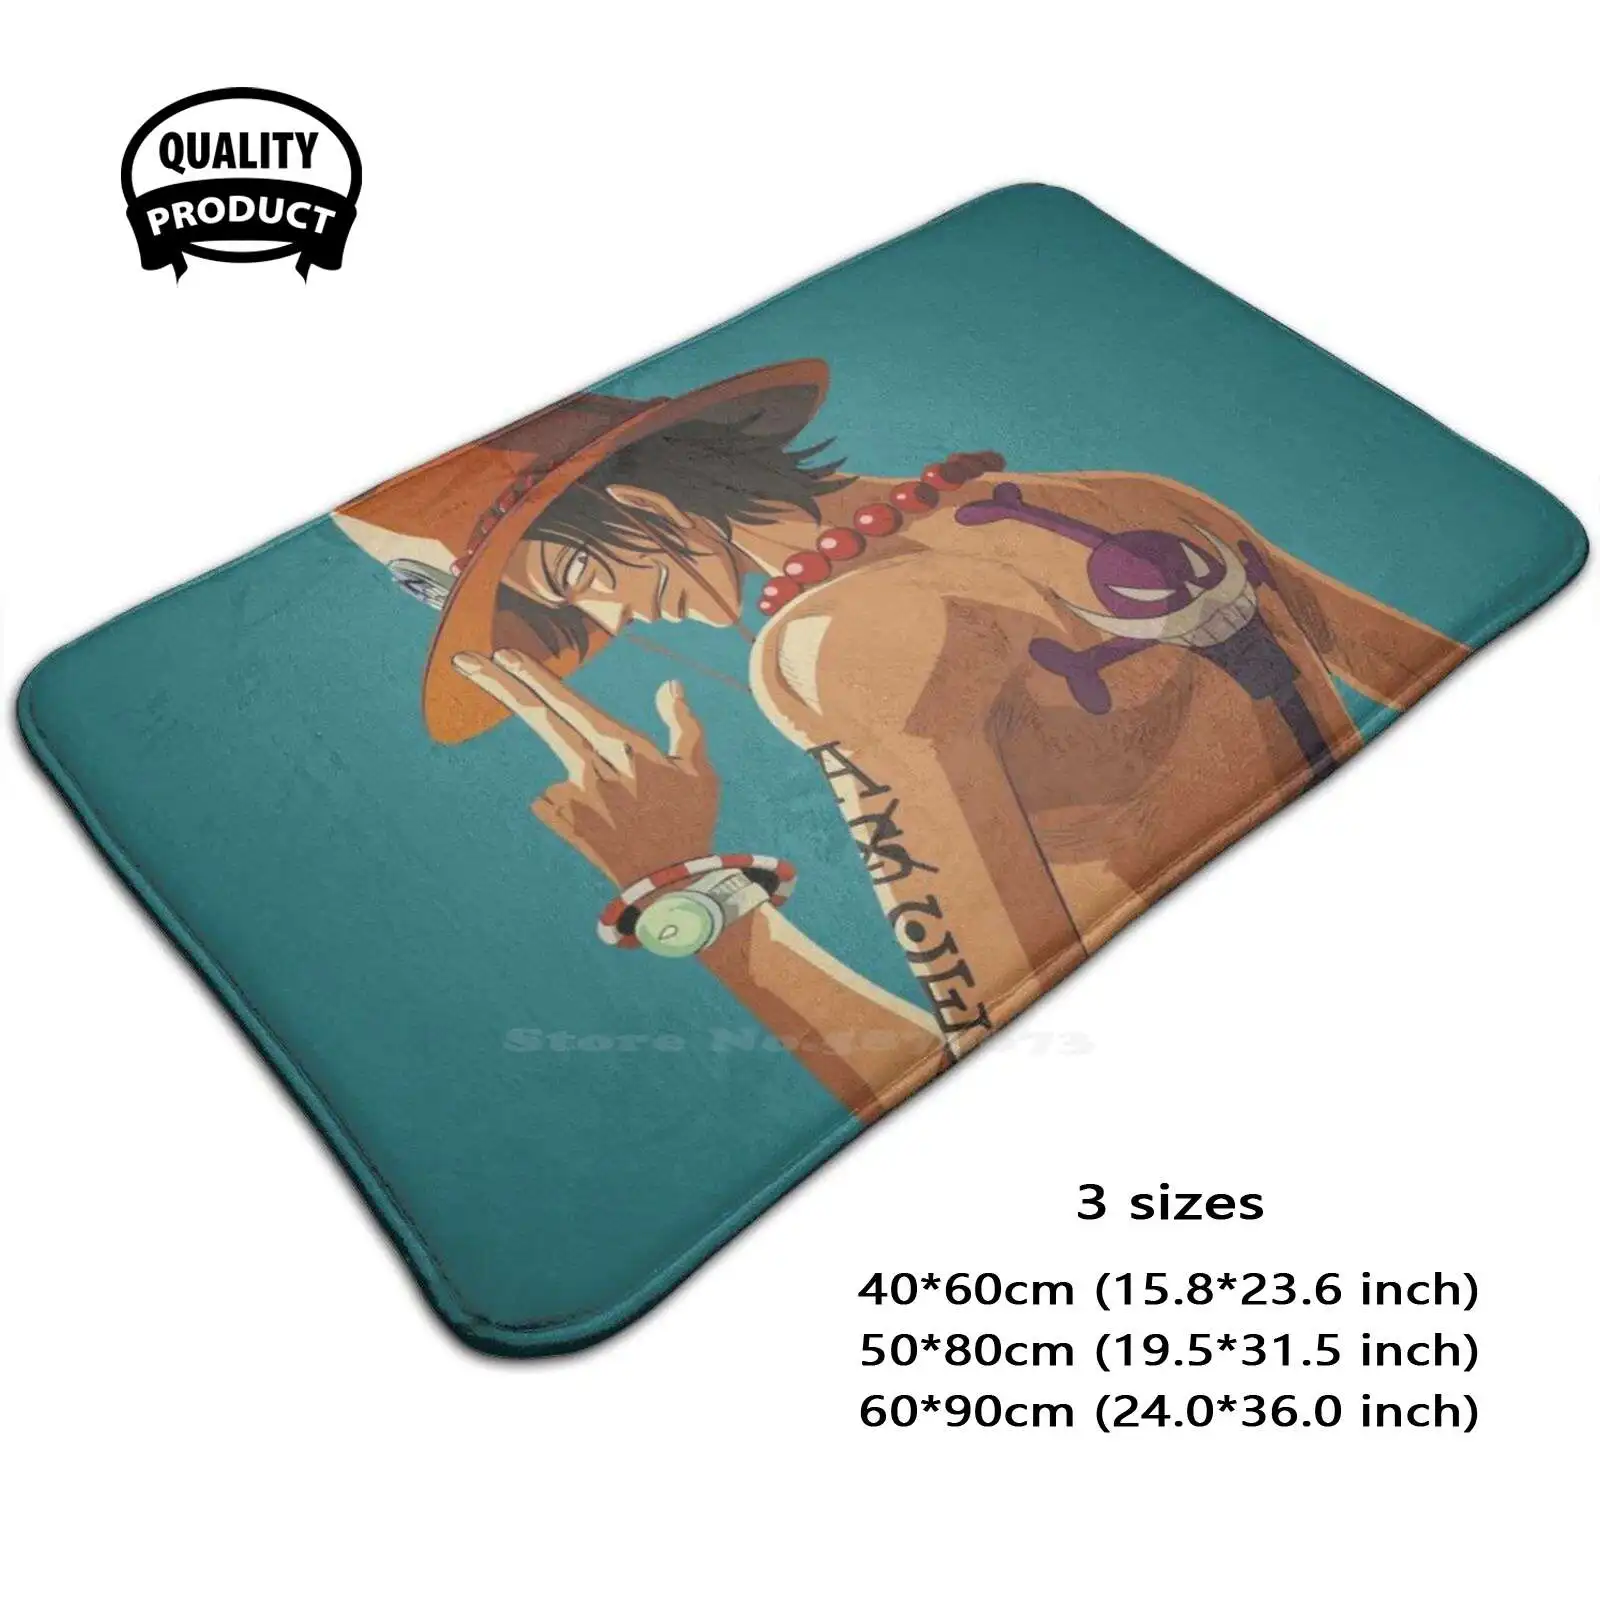 Portgas Fire Fist Soft House Family Anti-Slip Mat Rug Carpet Portgas Fire Fist Ace New Hot Music Cartoon Party Night Us Band